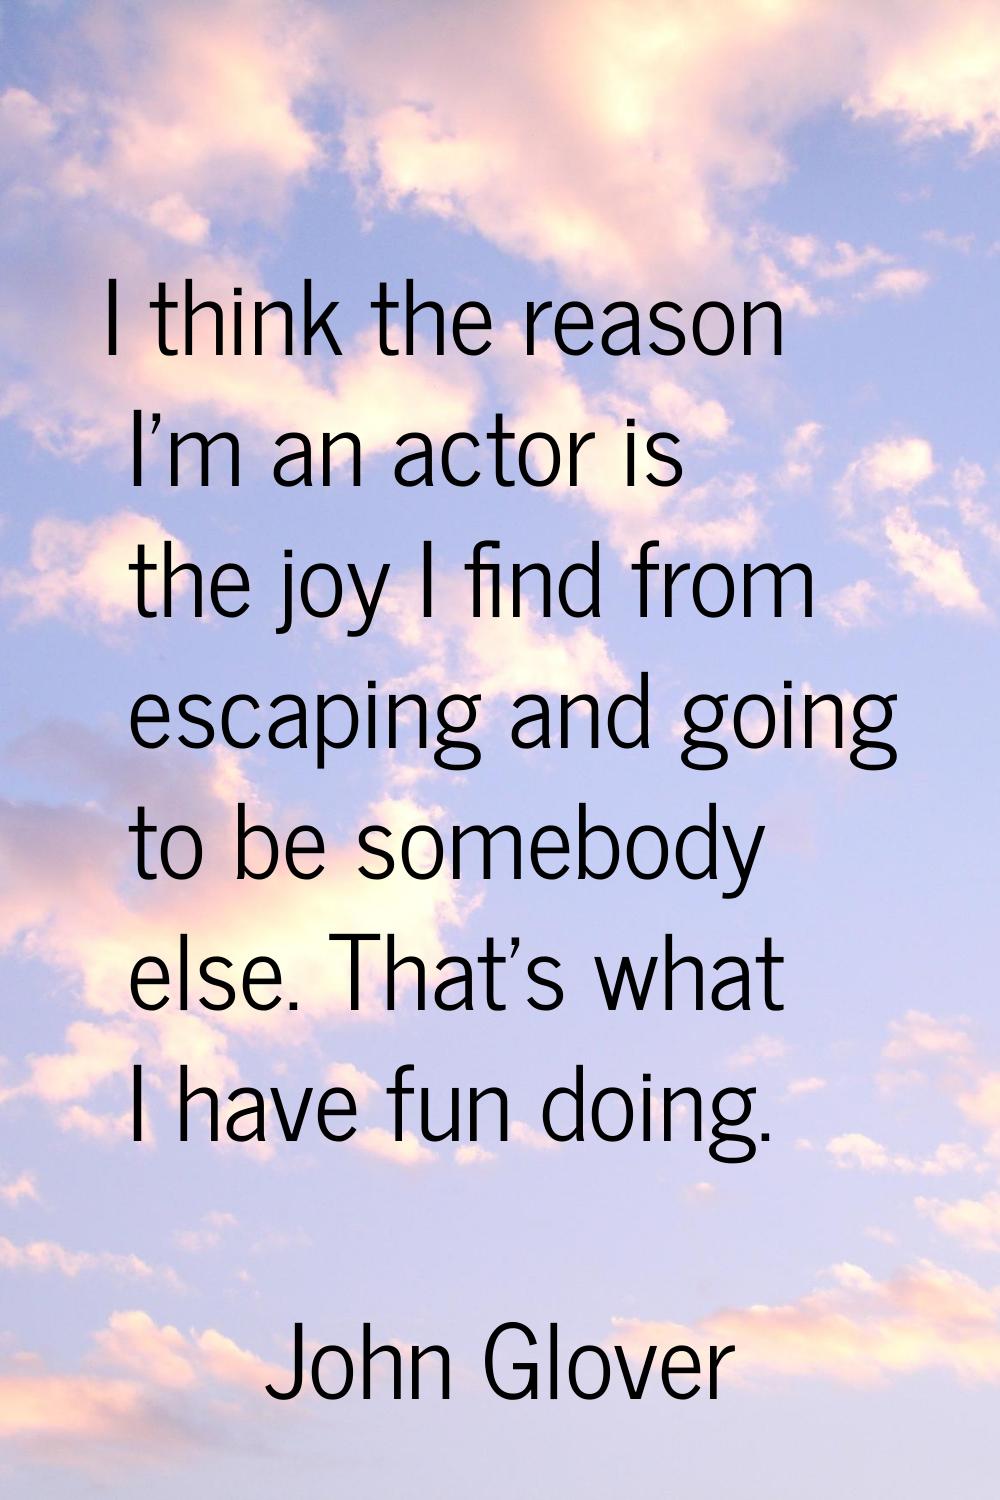 I think the reason I'm an actor is the joy I find from escaping and going to be somebody else. That